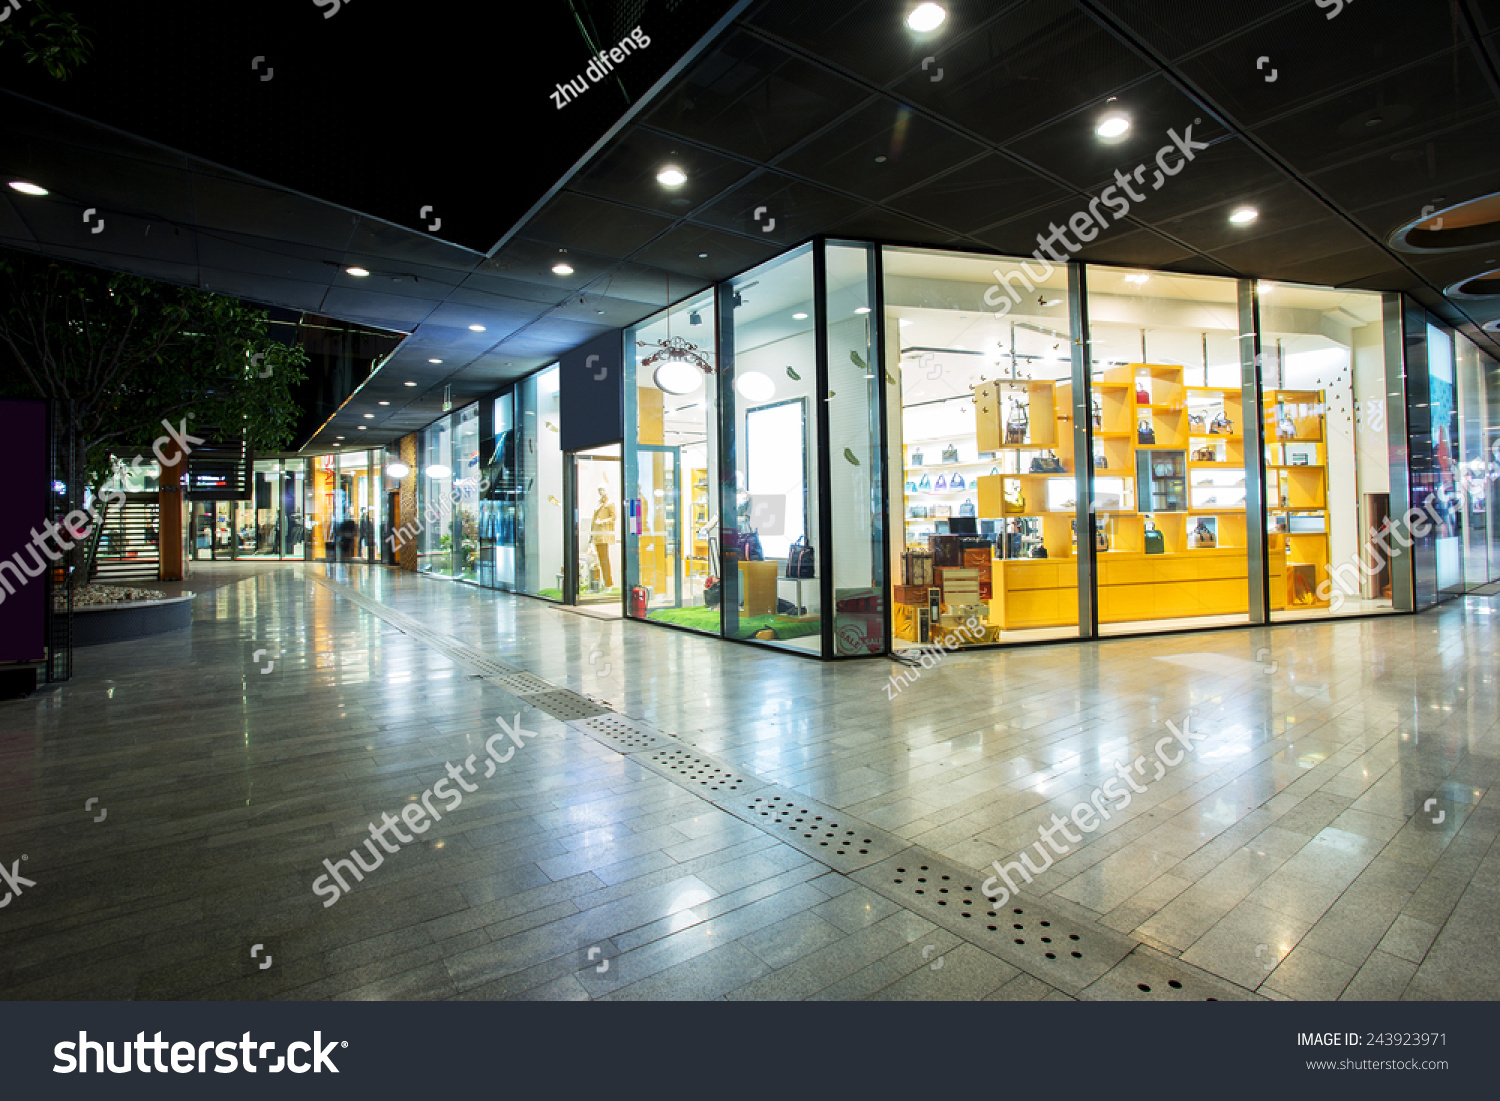 PowerPoint Template: store displays - storefront in shopping mall (jlkujkuoi)